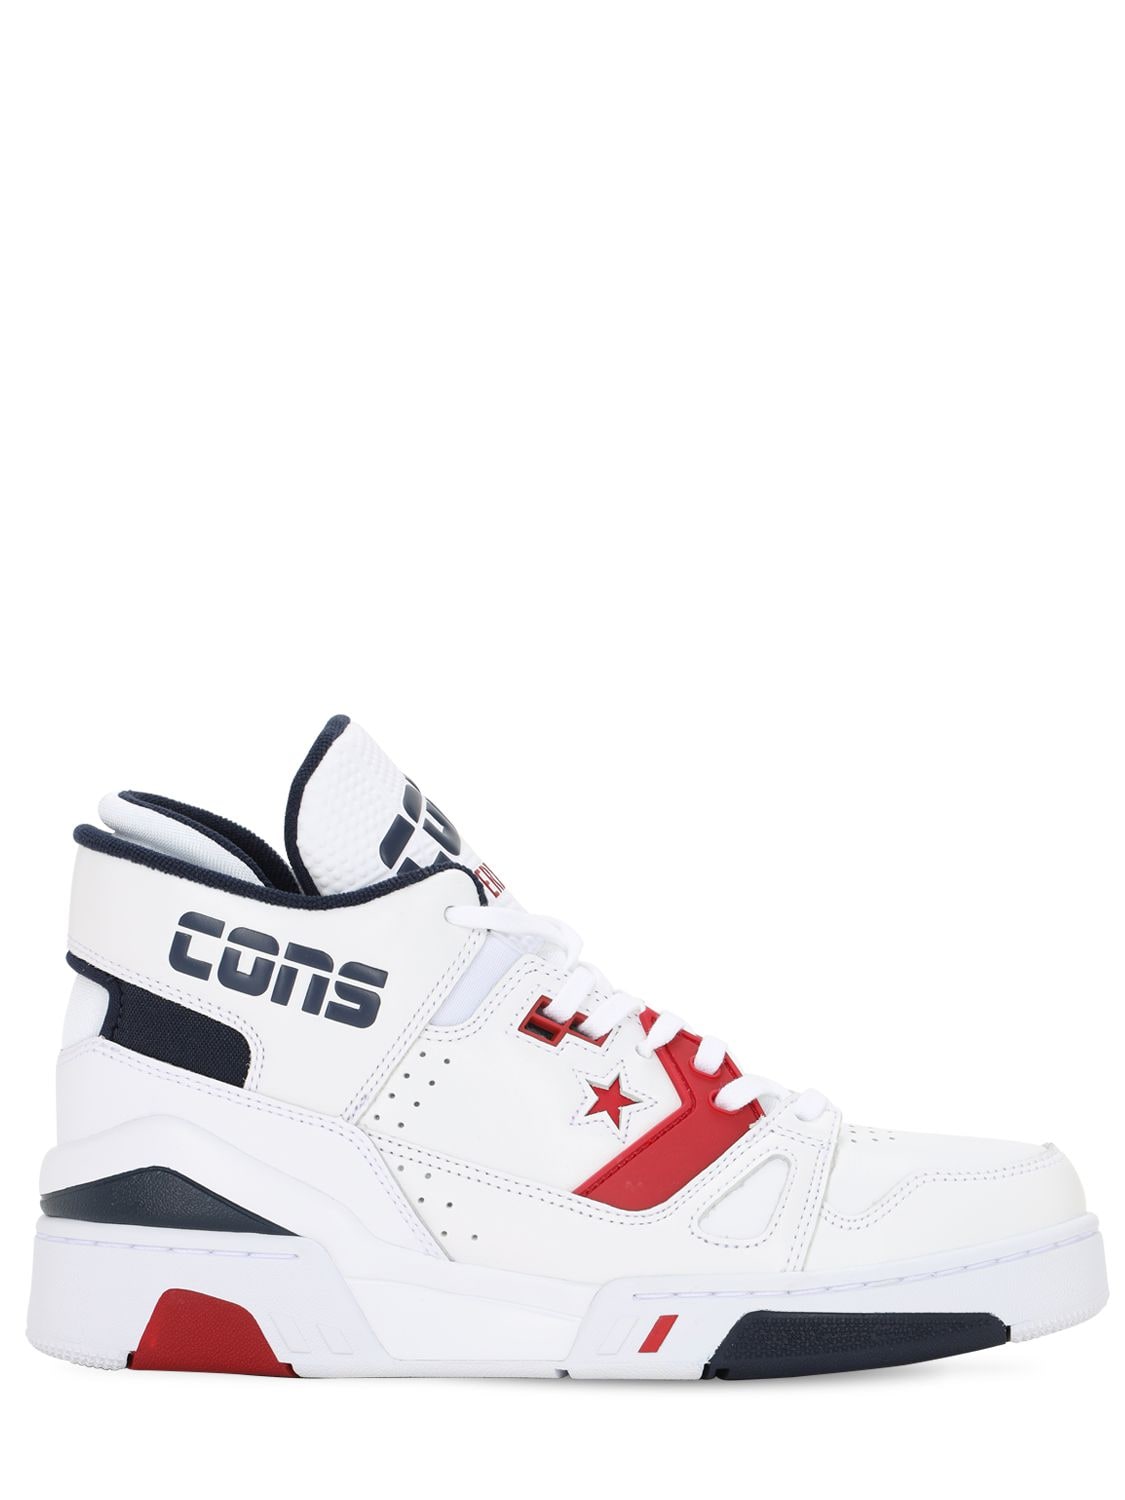 Converse Erx 260 - Mid Sneakers In Red,white,blue | ModeSens